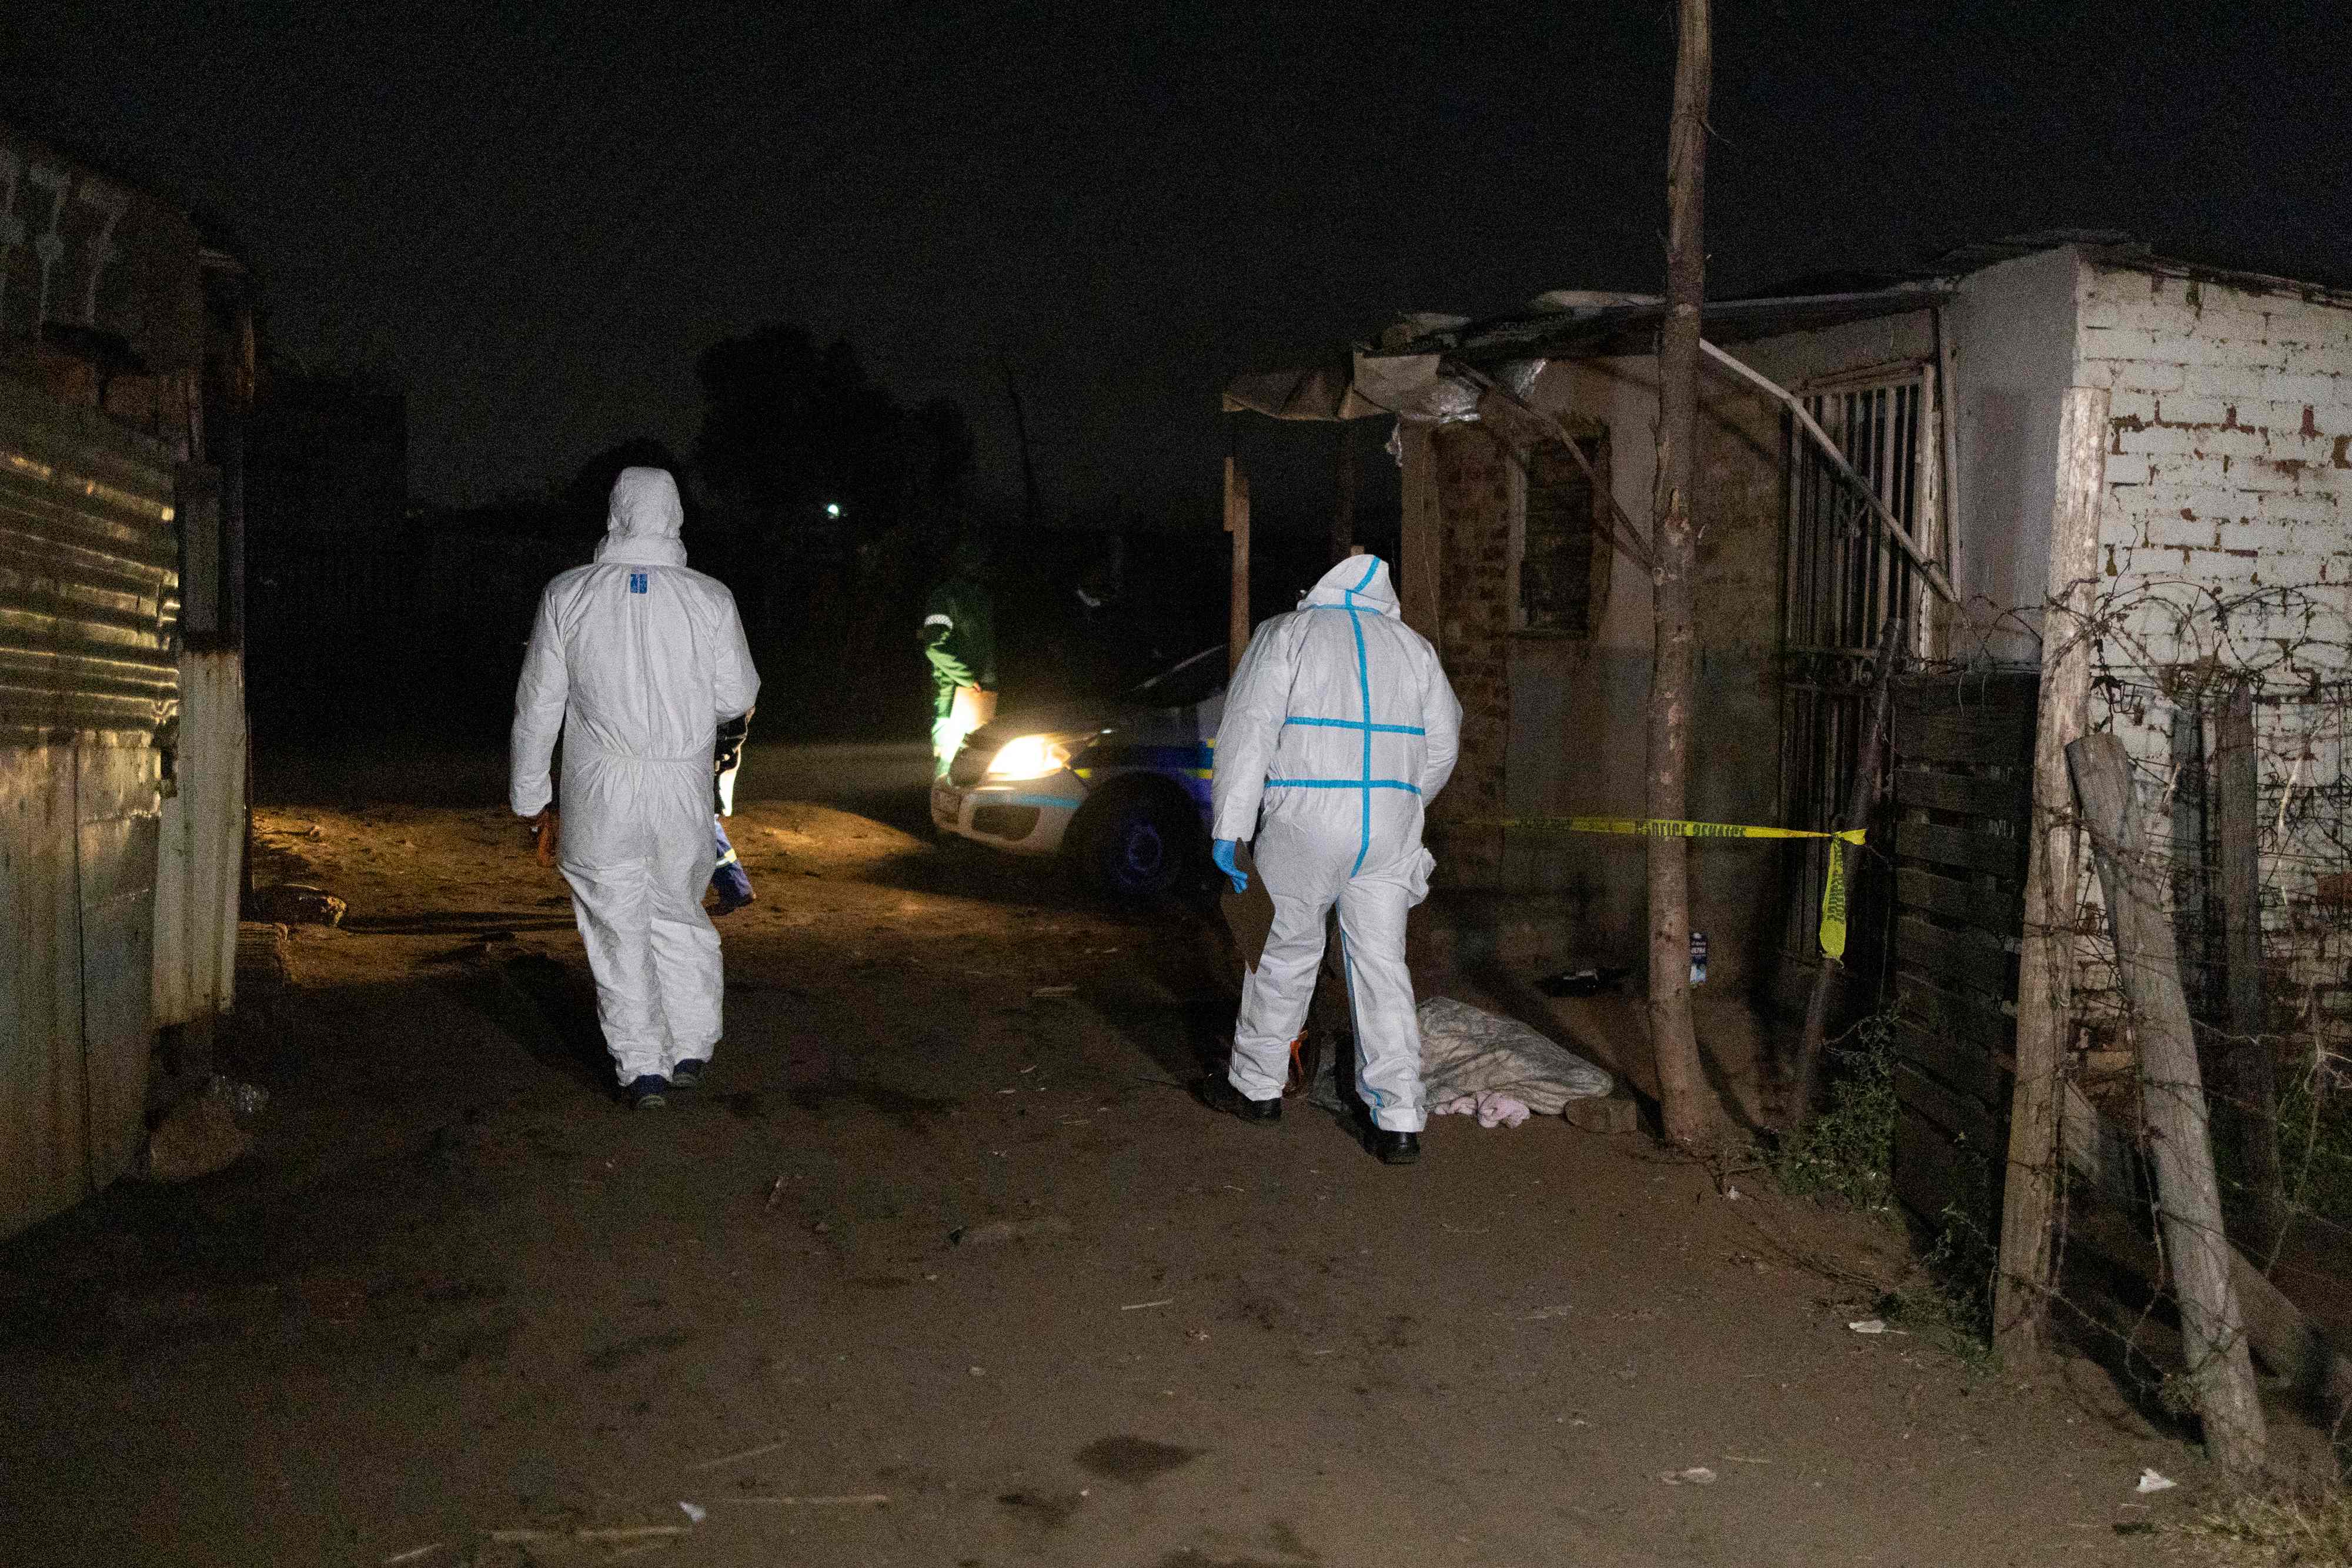 Members of the South African Police Service’s (SAPS) forensic department walk past a body covered with a blanket